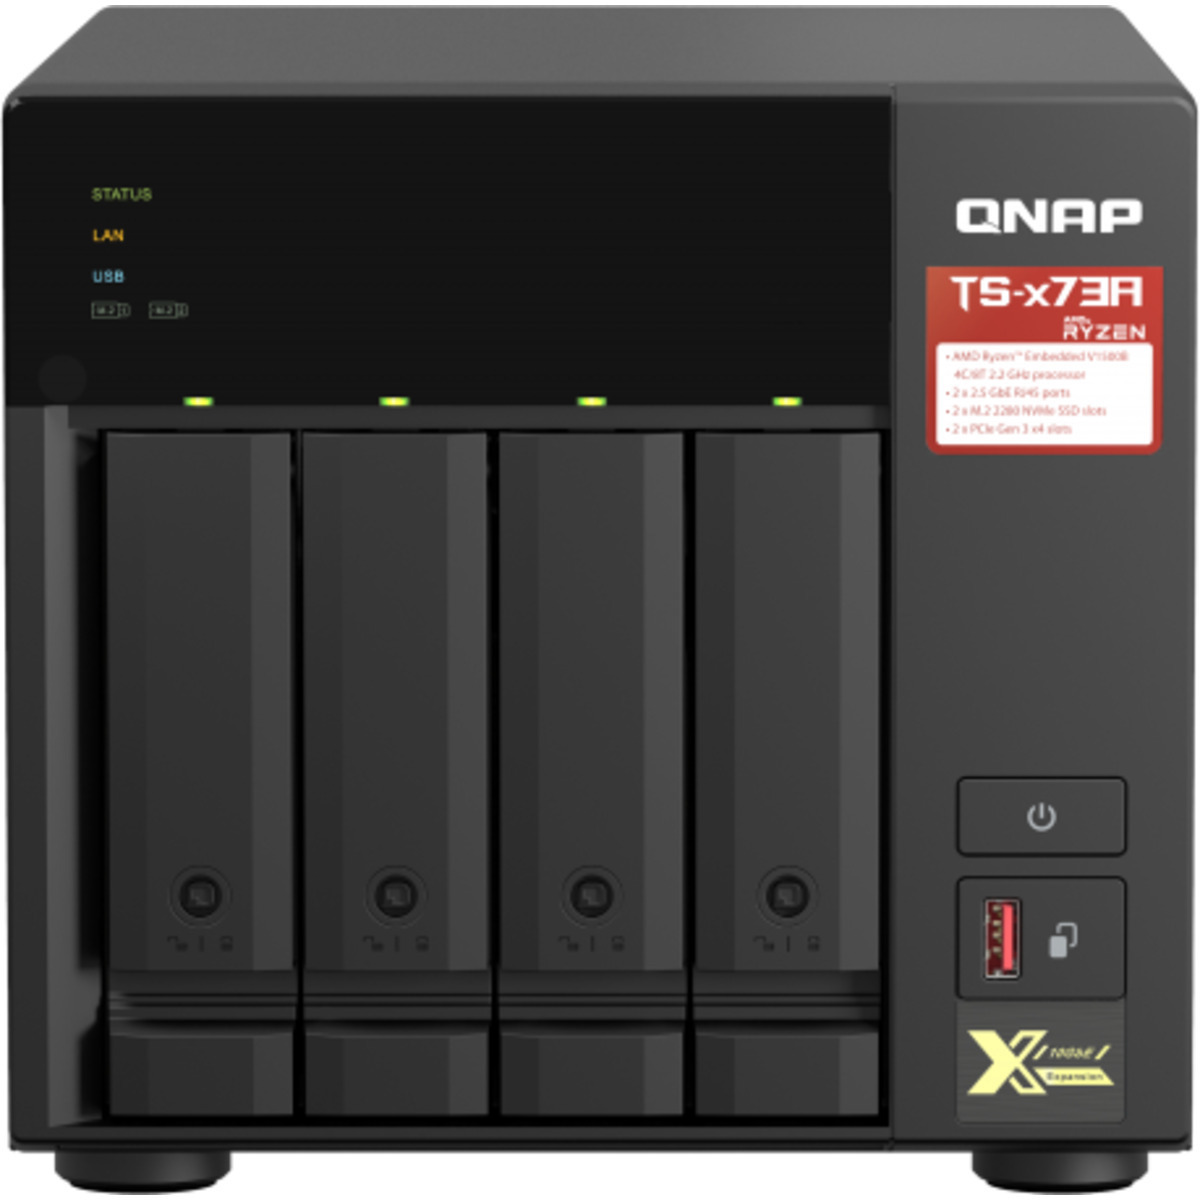 QNAP TS-473A 96tb 4-Bay Desktop Multimedia / Power User / Business NAS - Network Attached Storage Device 4x24tb Seagate EXOS X24 ST24000NM002H 3.5 7200rpm SATA 6Gb/s HDD ENTERPRISE Class Drives Installed - Burn-In Tested TS-473A